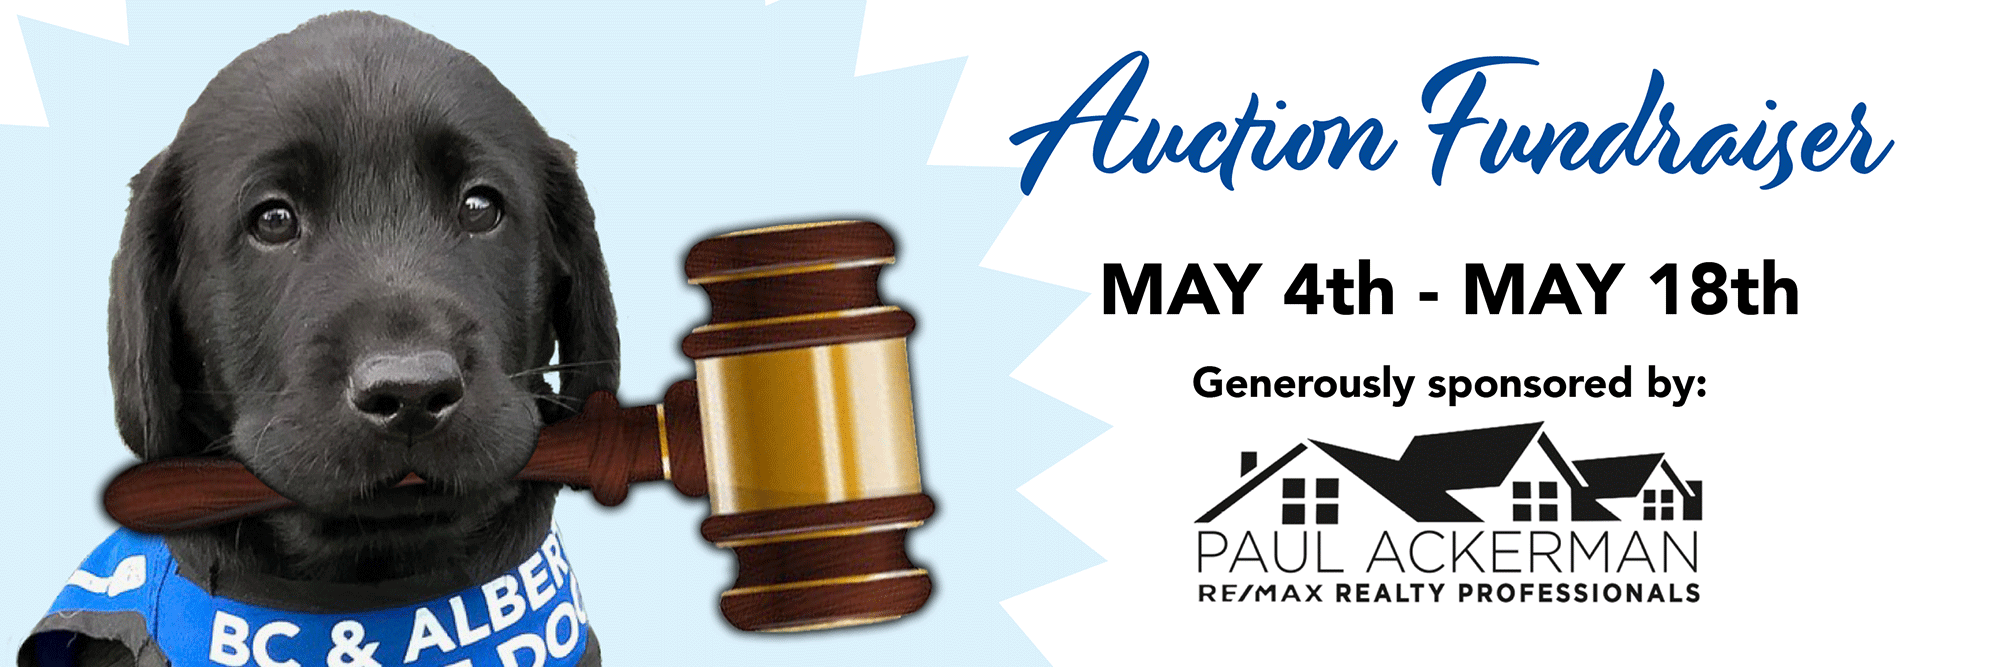 Online Silent Auction Fundraiser Runs May 4th to May 18th